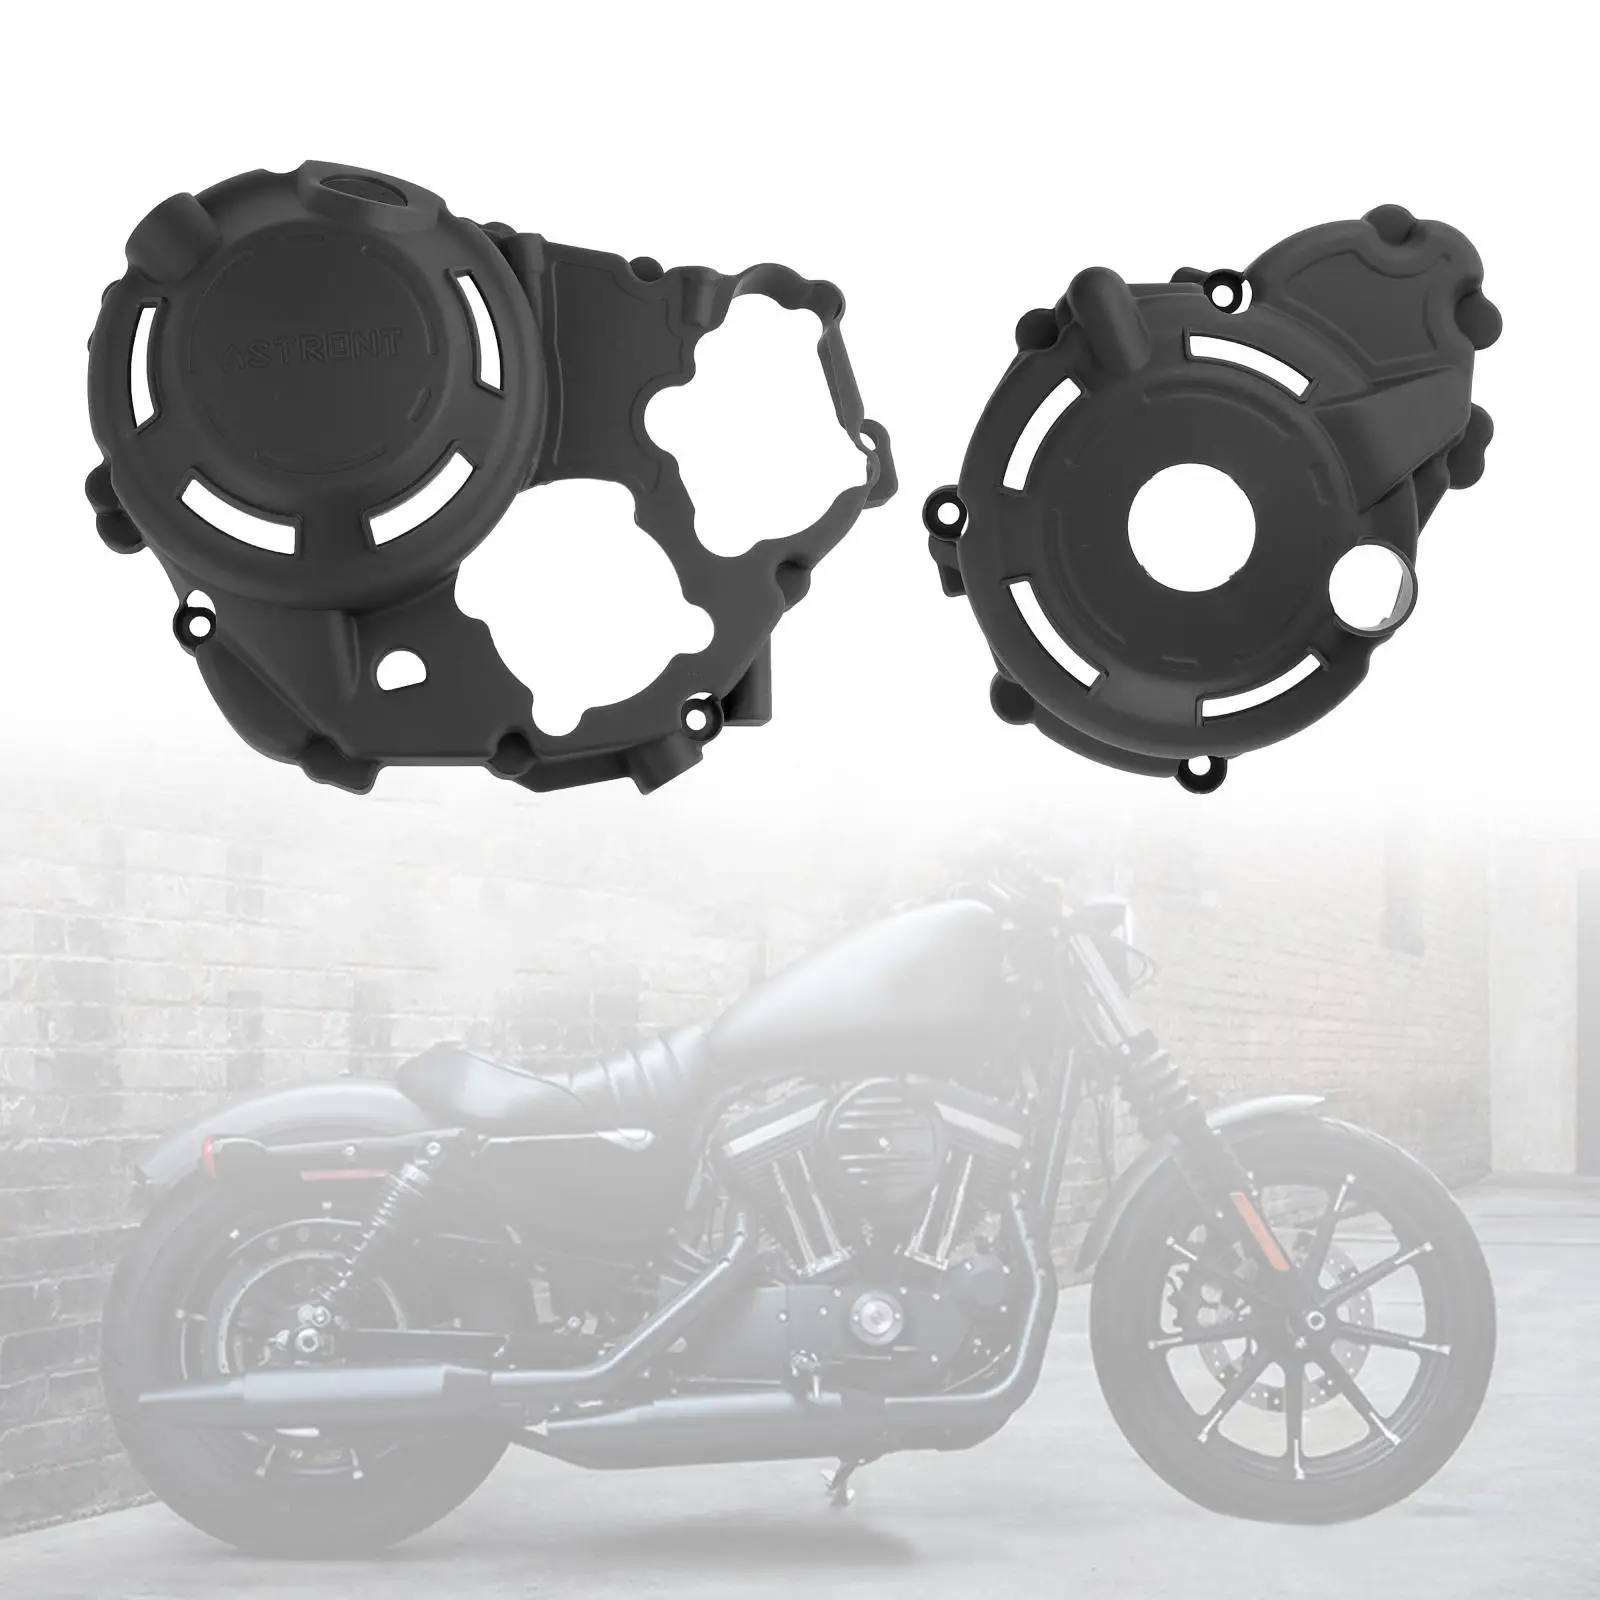  Engine  Cover Professional Guard Case Fit for  Crf2500L